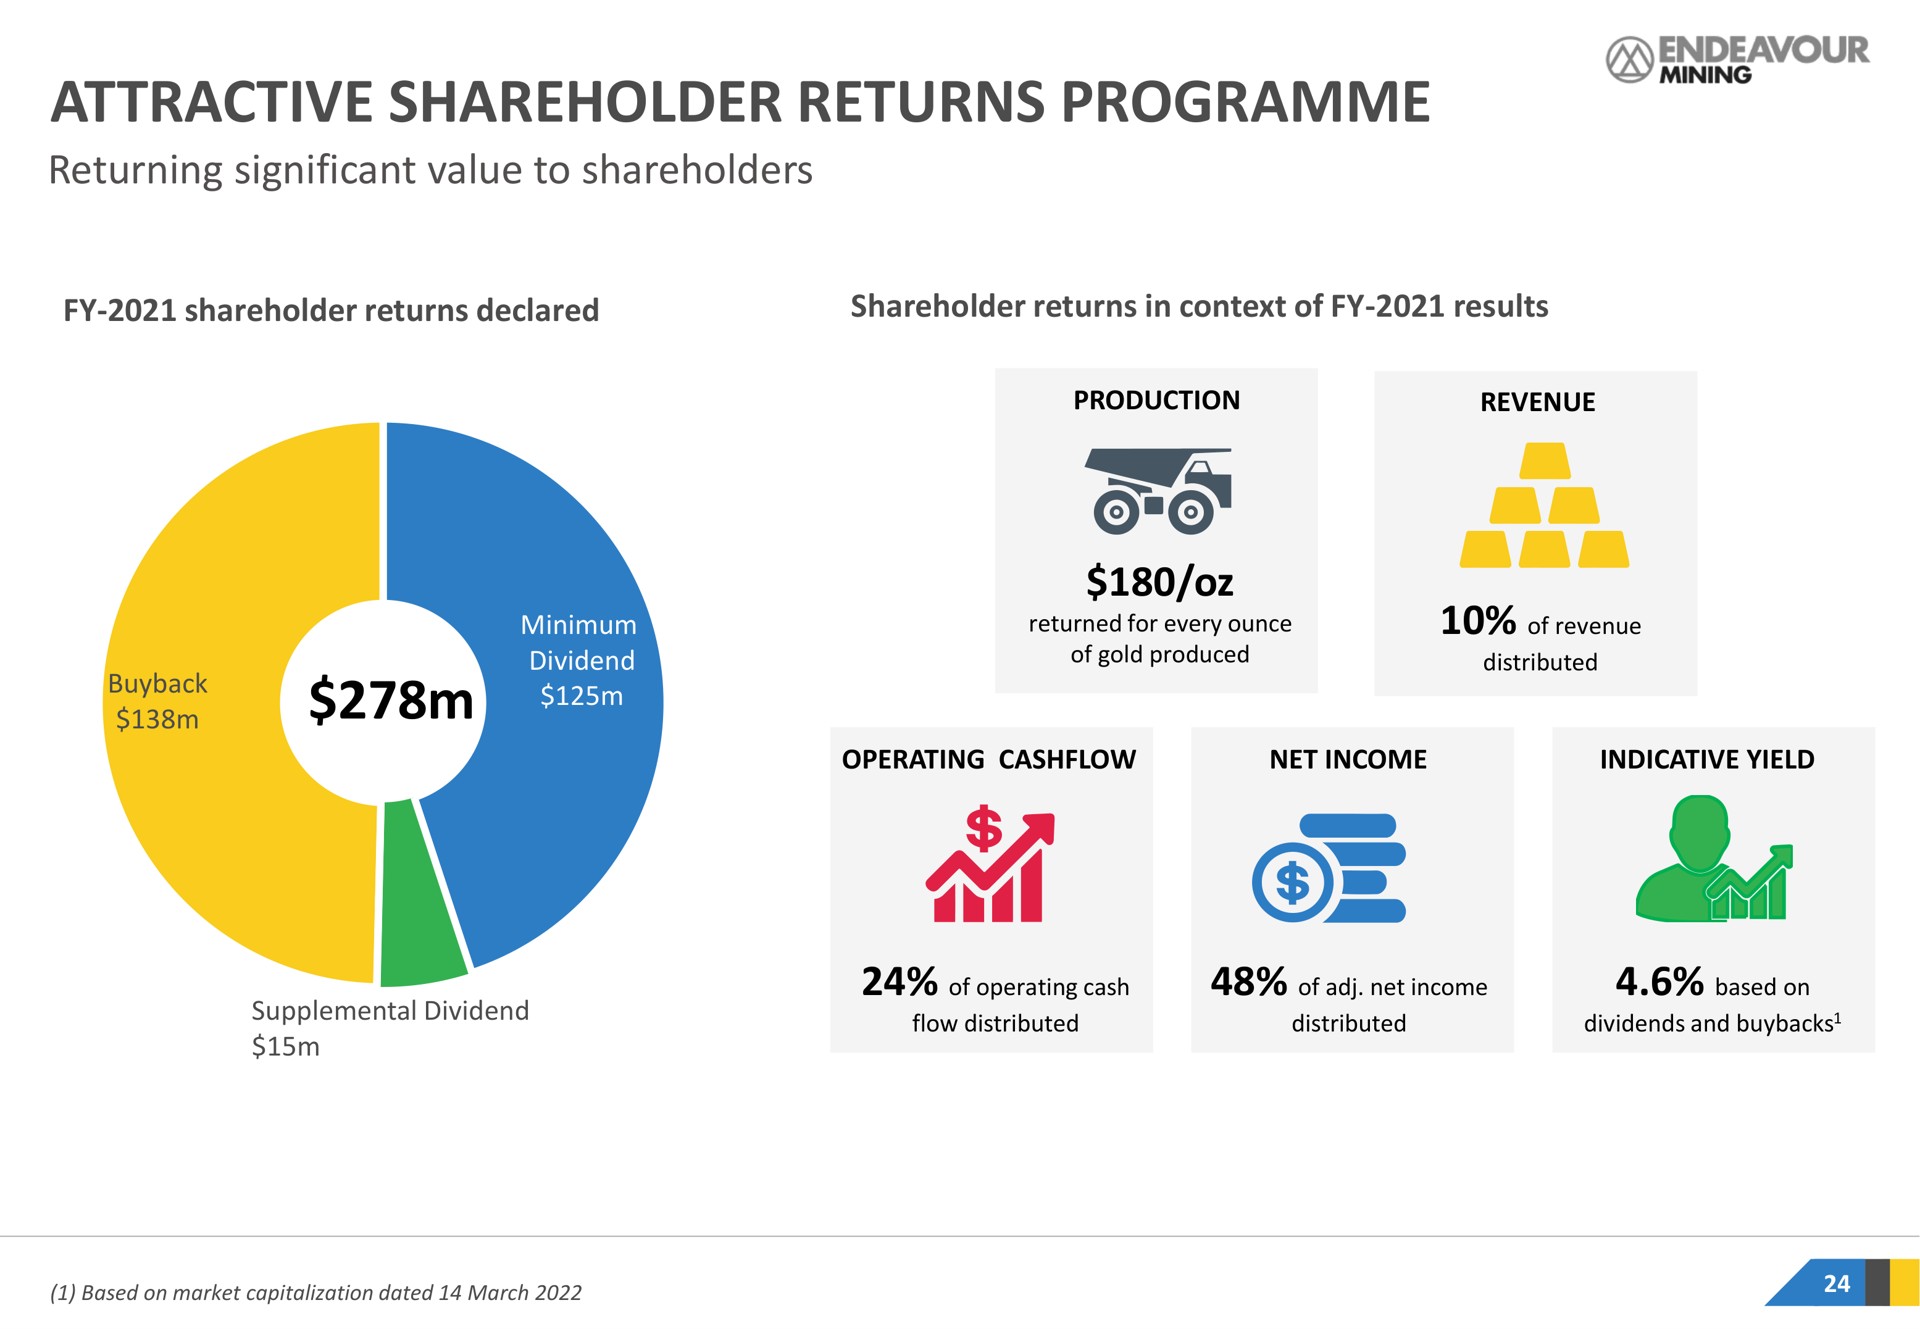 attractive shareholder returns returning significant value to shareholders | Endeavour Mining